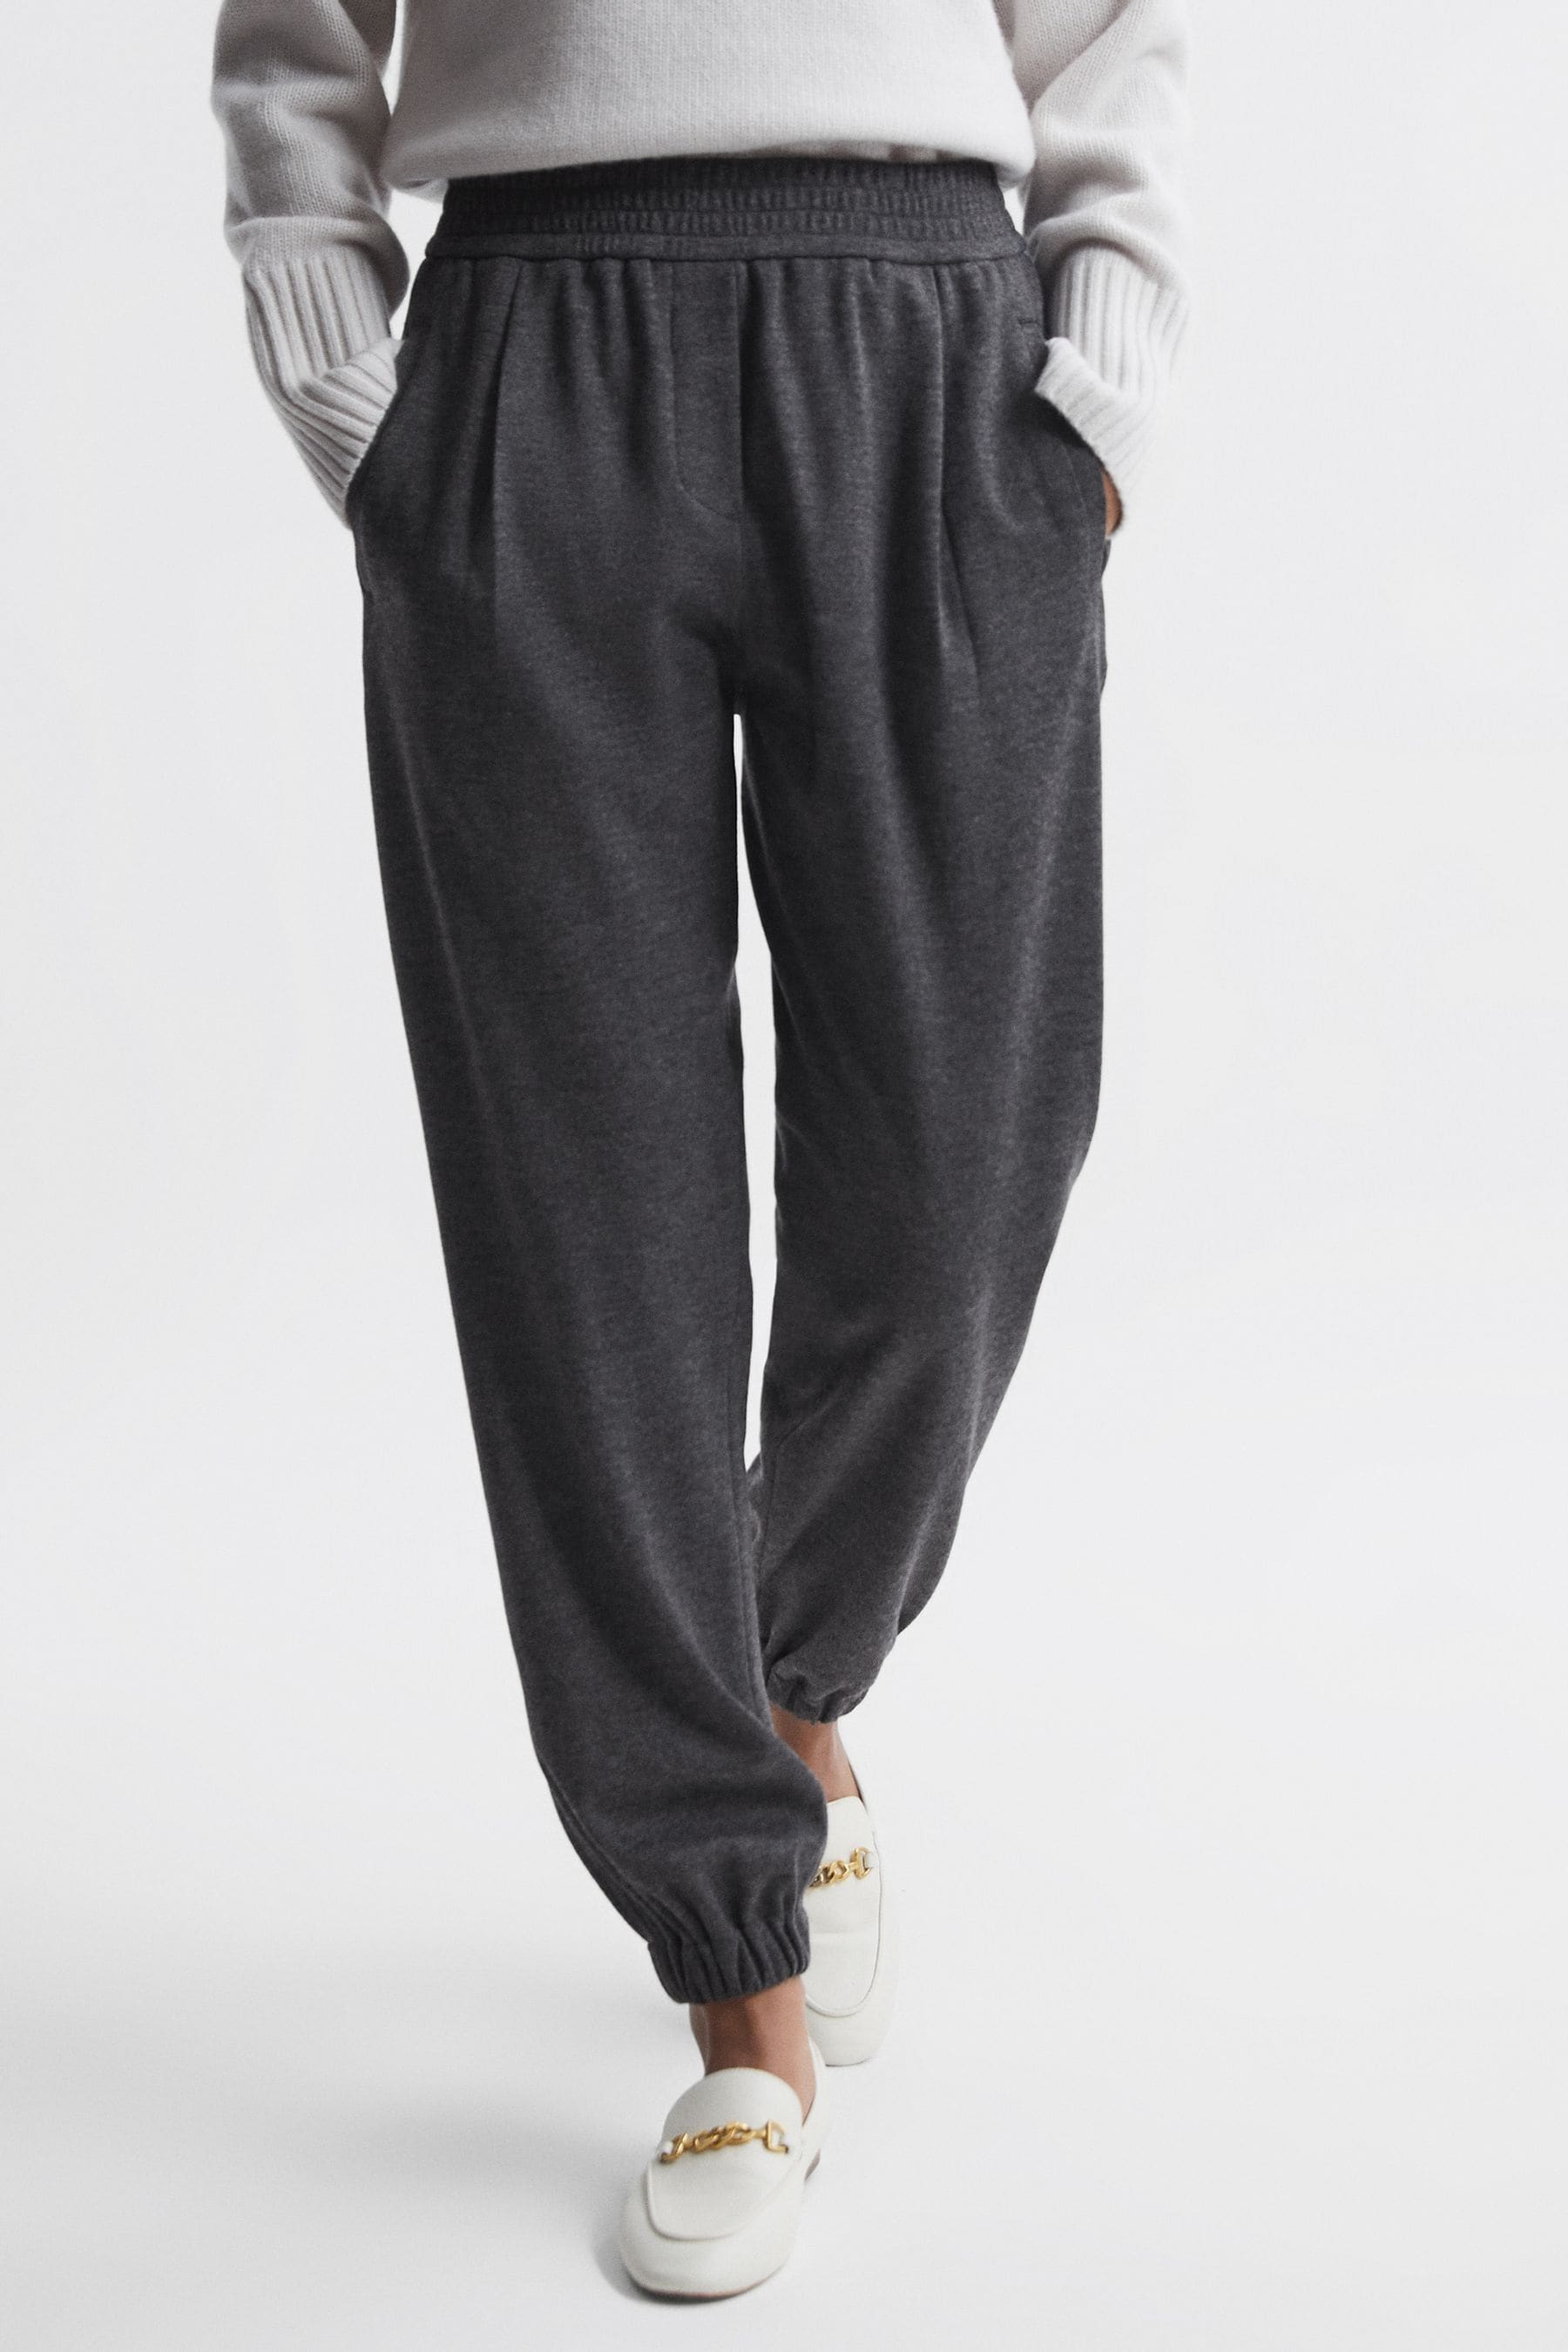 Reiss Karina - Charcoal Wool Elasticated Pleat Front Joggers, Us 0